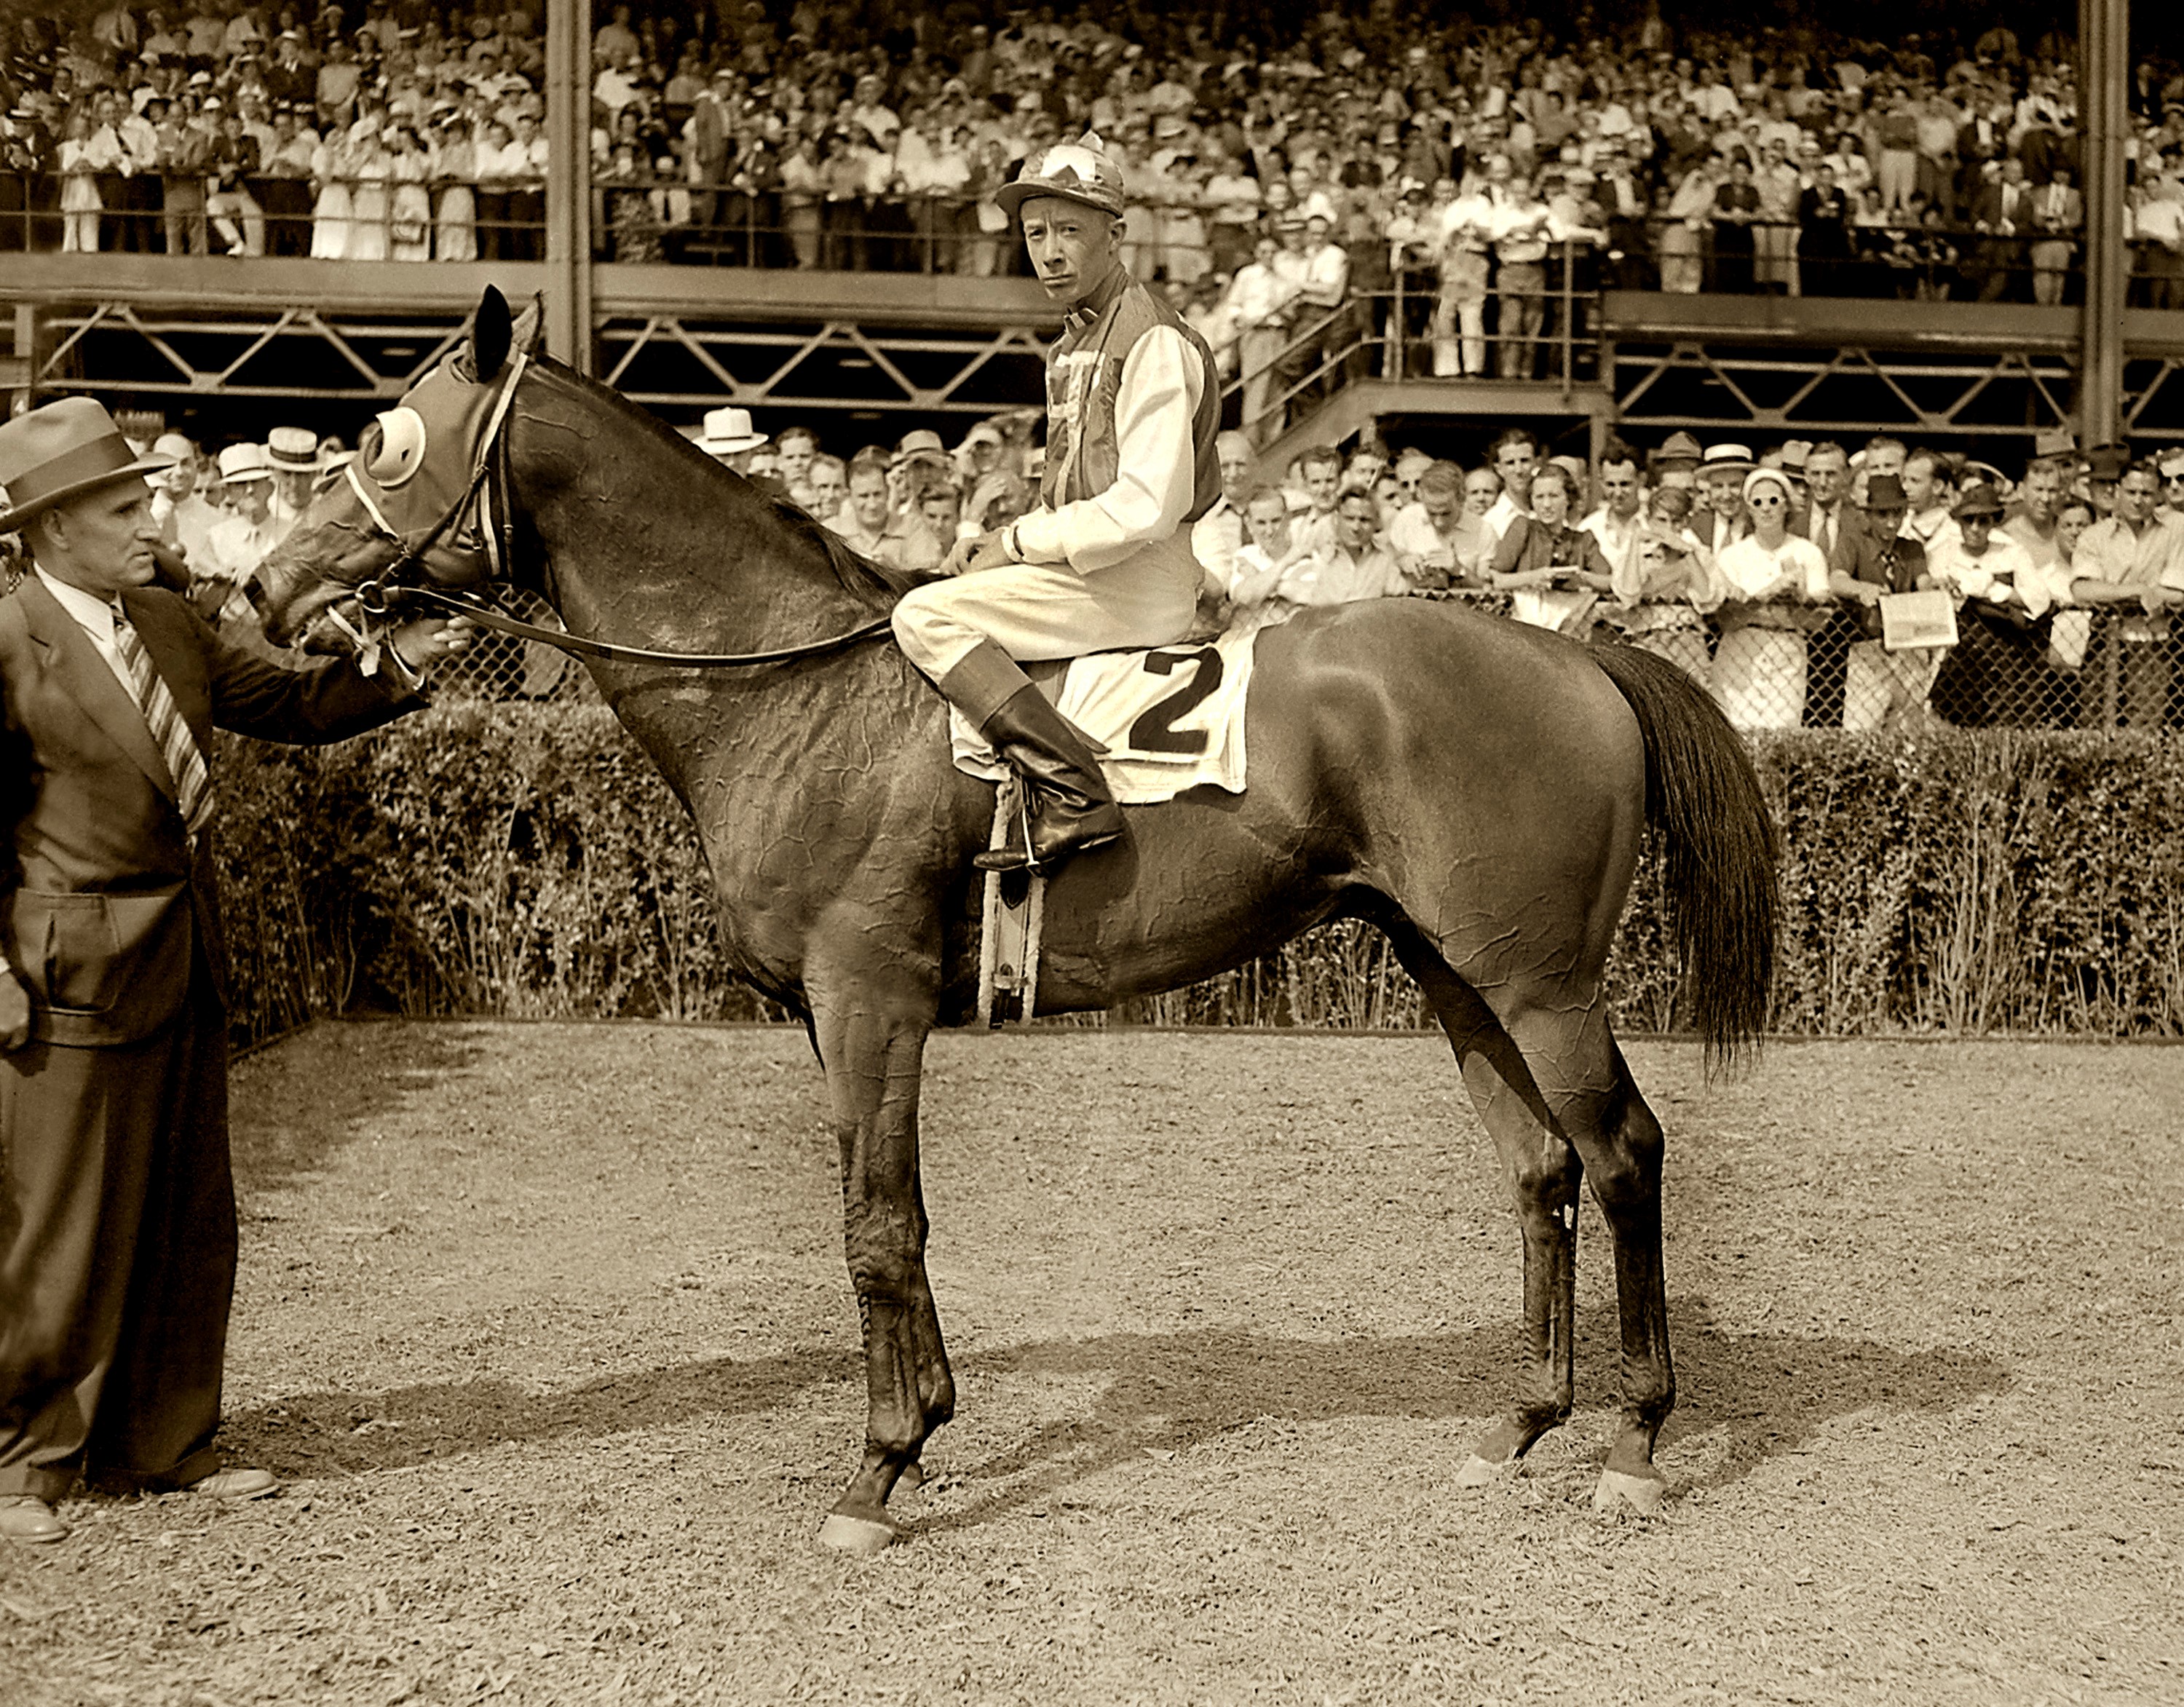 Seabiscuit (Red Pollard up) in the winner's circle with trainer Tom Smith for the 1937 Yonkers Handicap at Empire City (Keeneland Library Morgan Collection/Museum Collection)